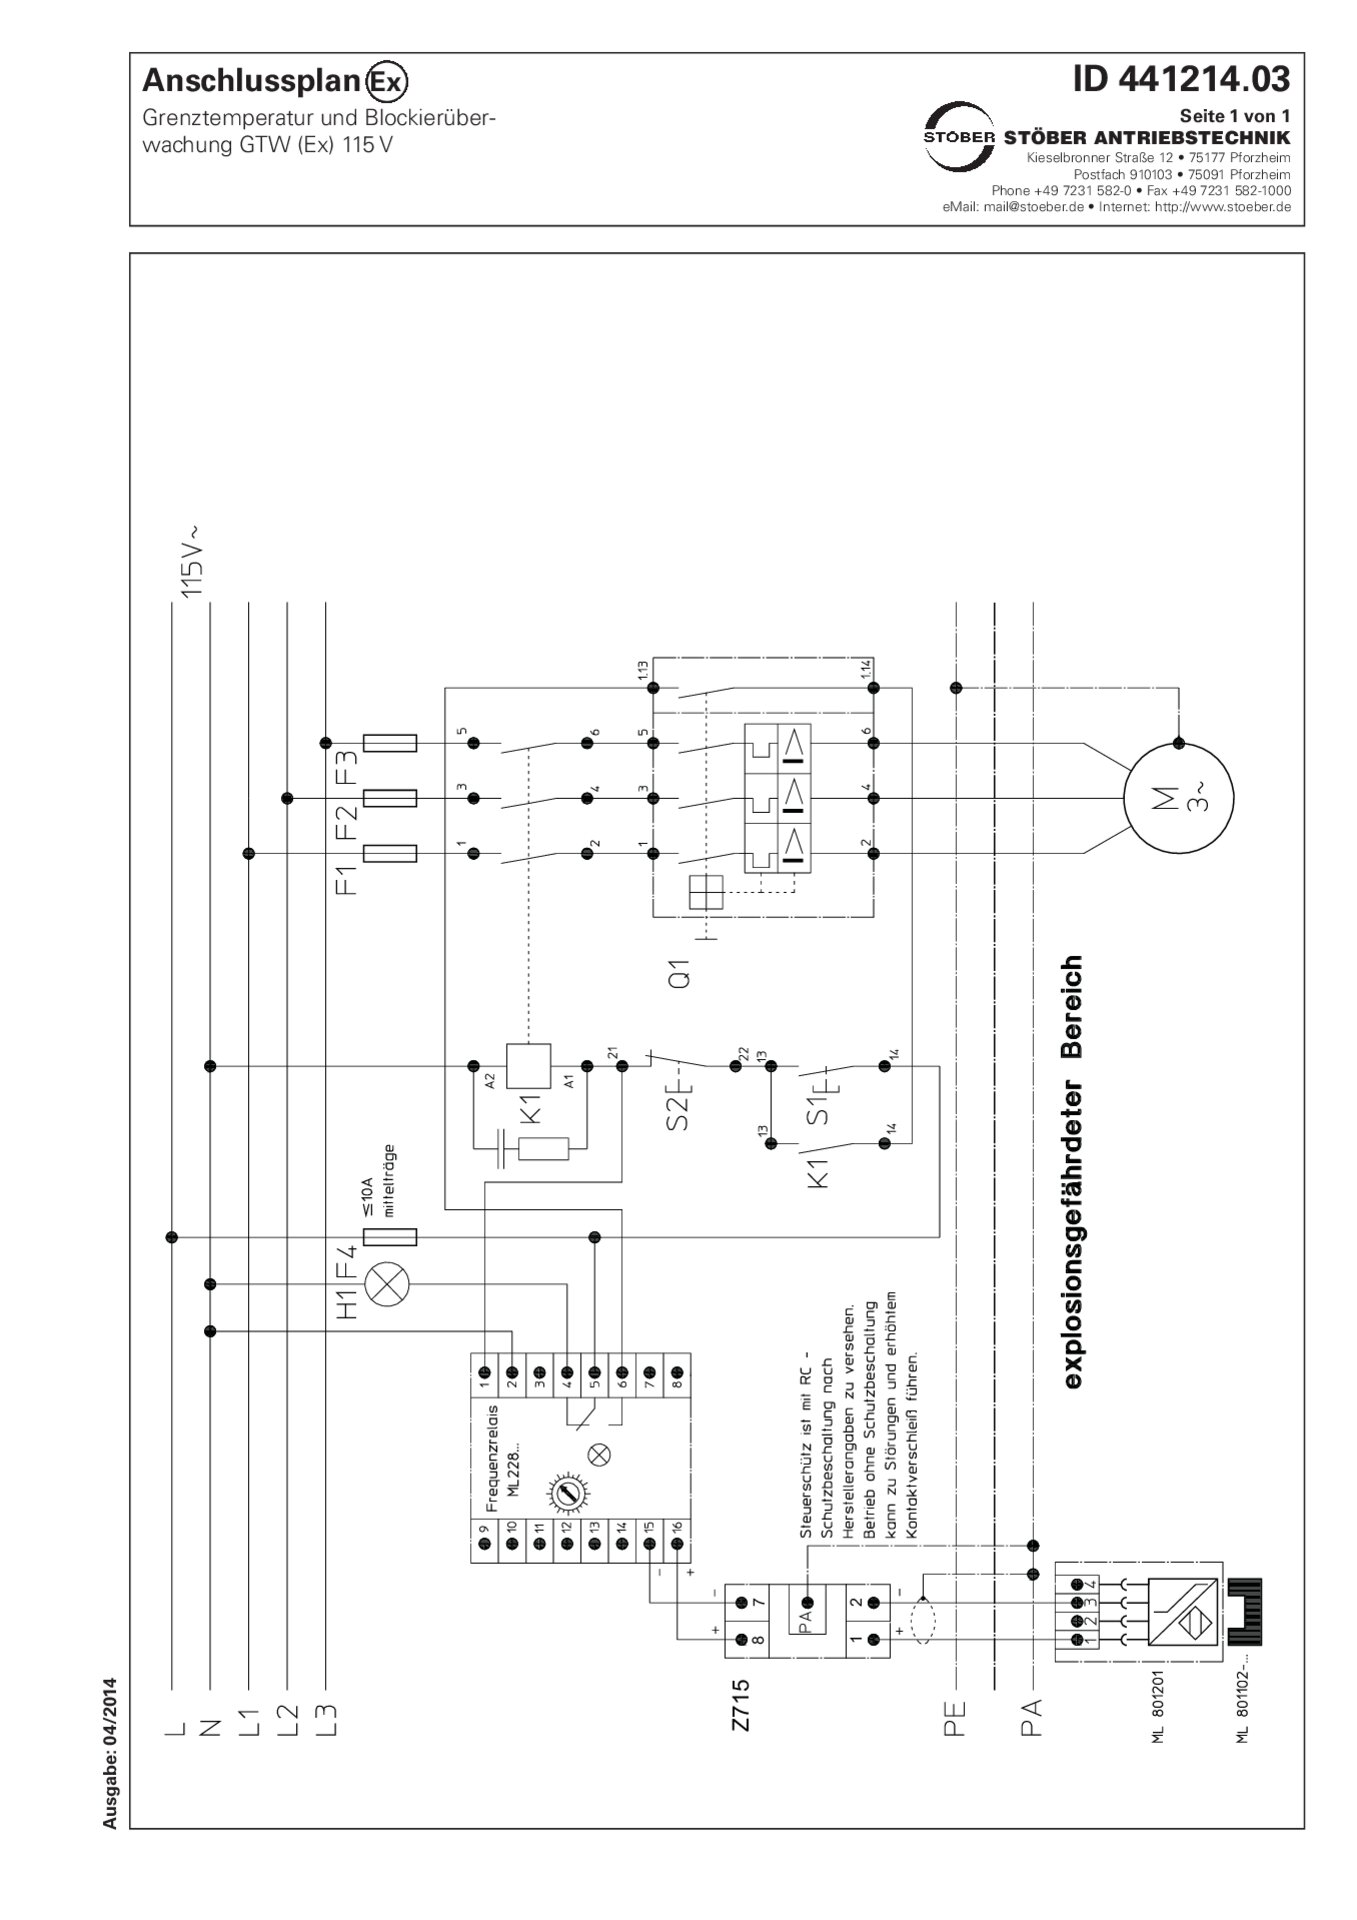 Connection plan Limiting temperature and jamming control GTW (Ex) 115 V